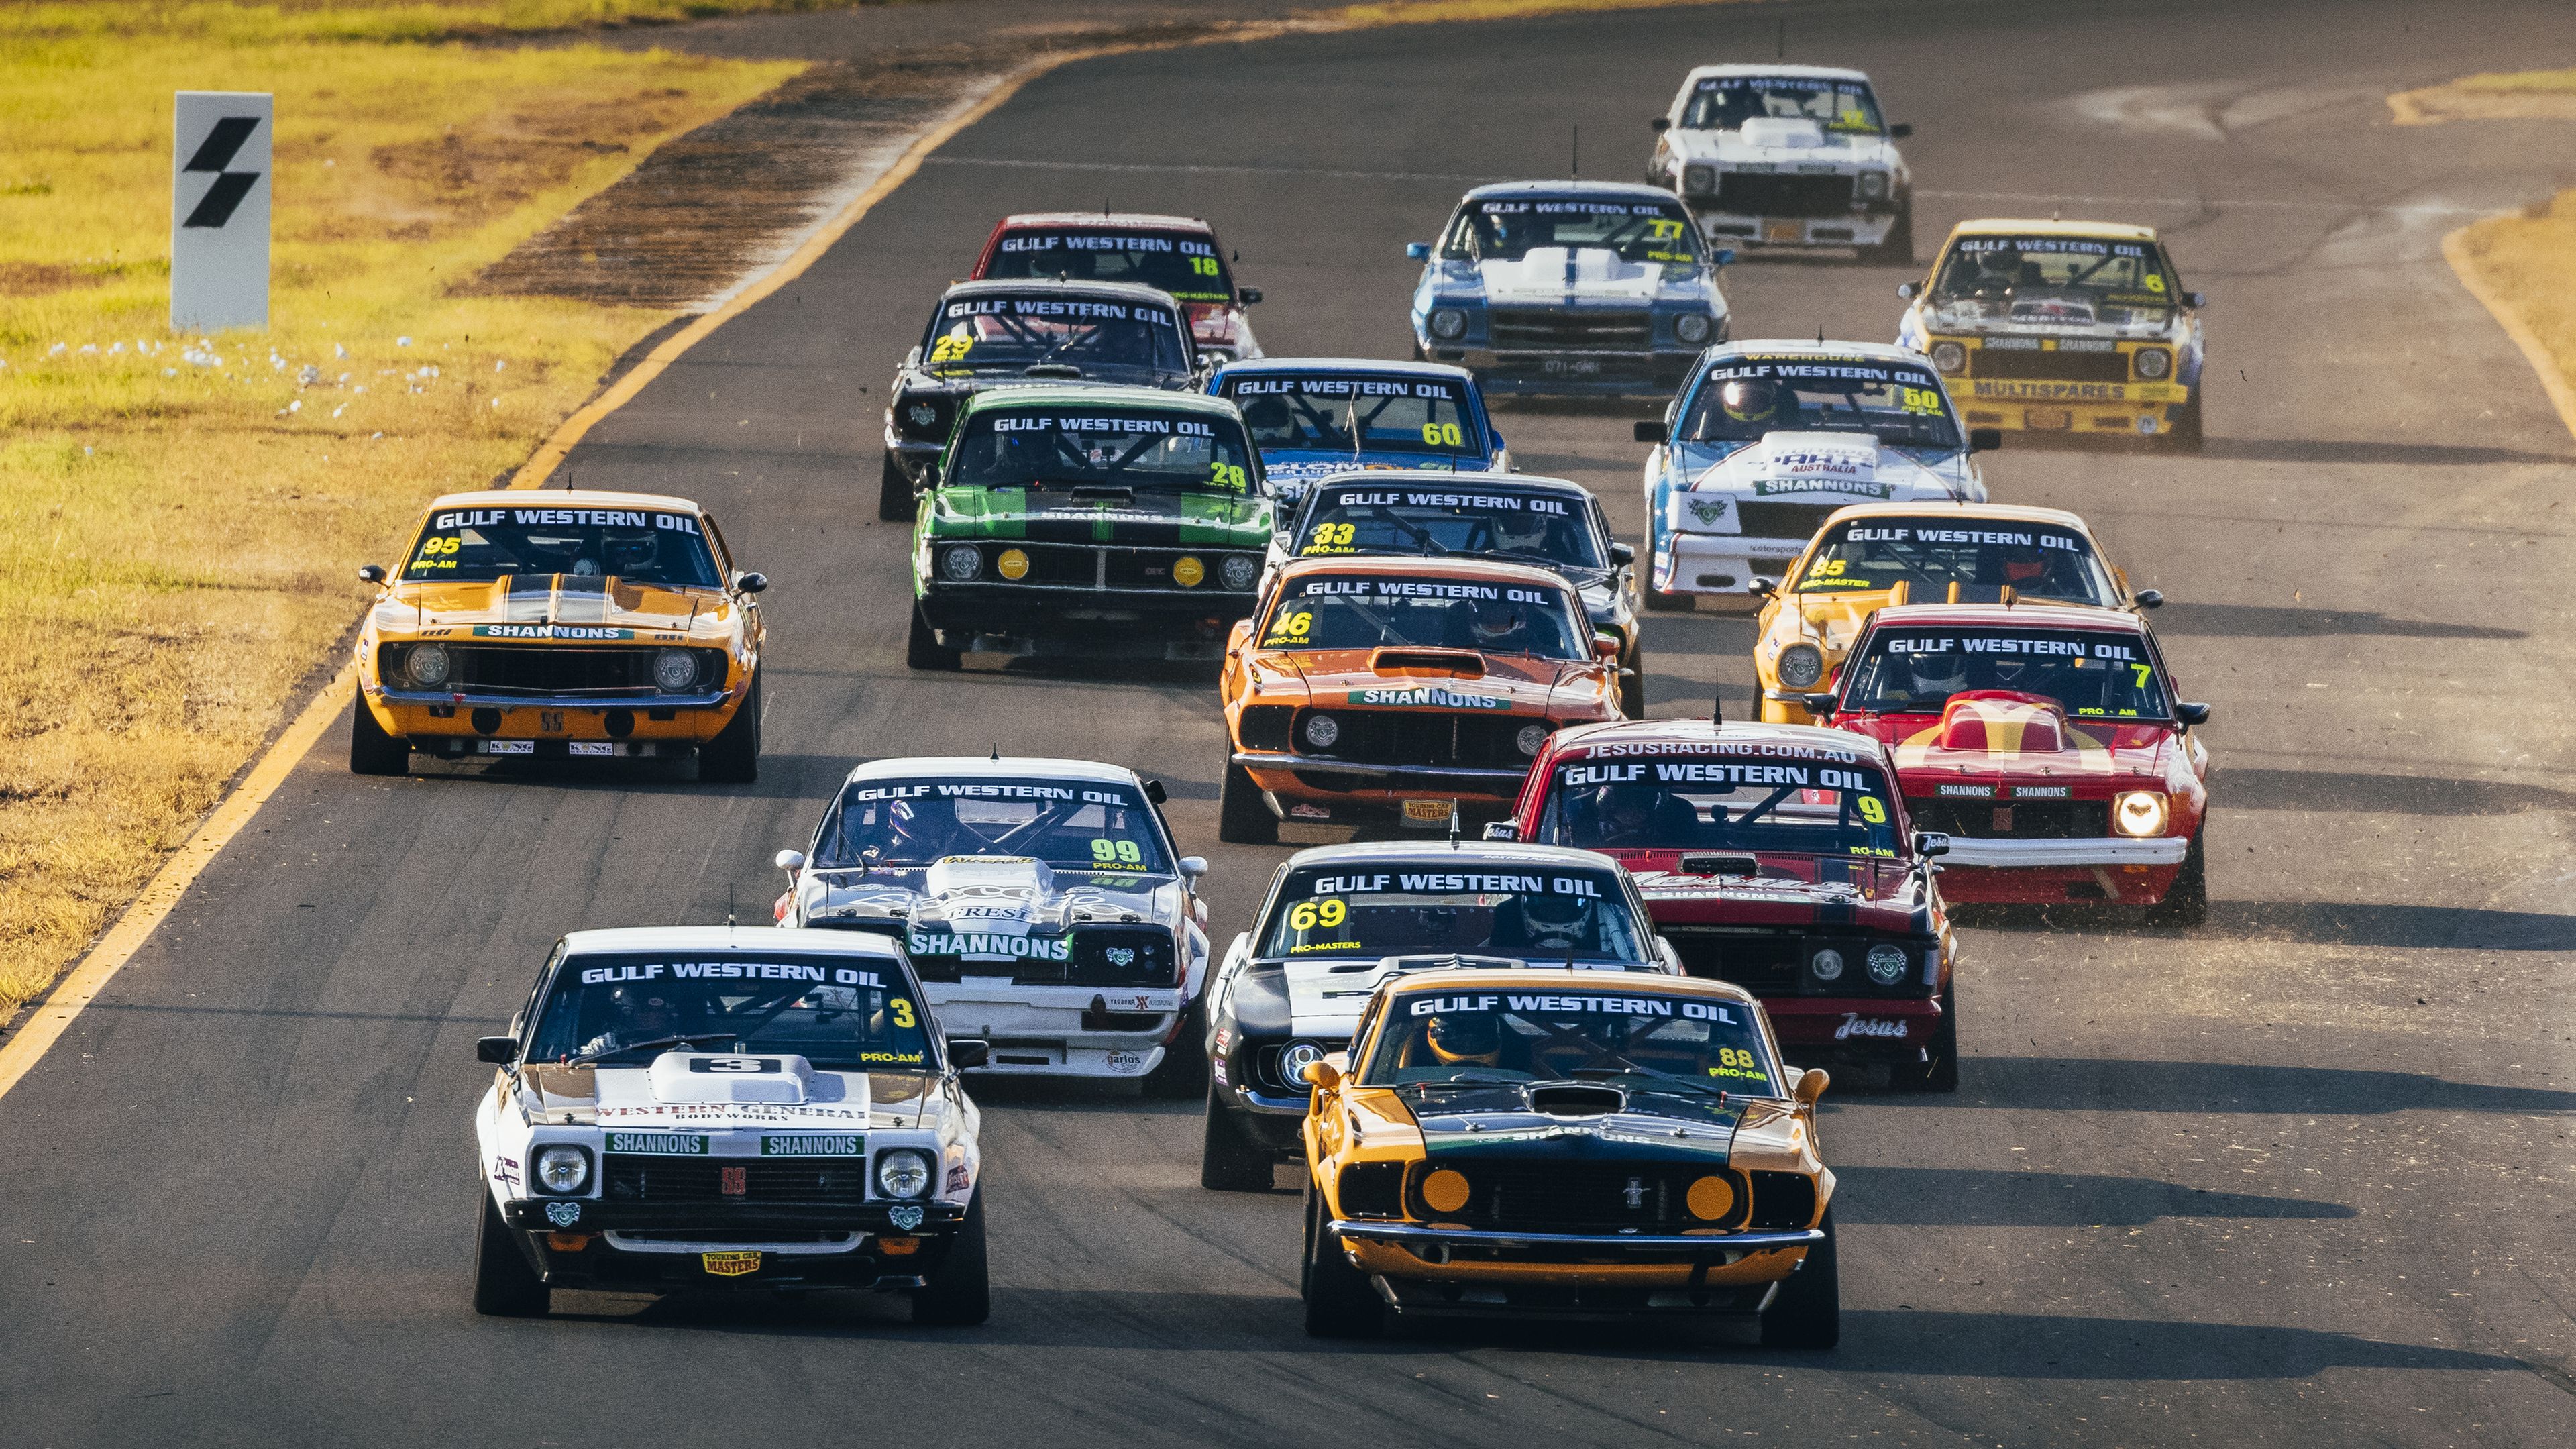 Son of Bathurst 1000 legend headlines Touring Car Masters field for SpeedSeries